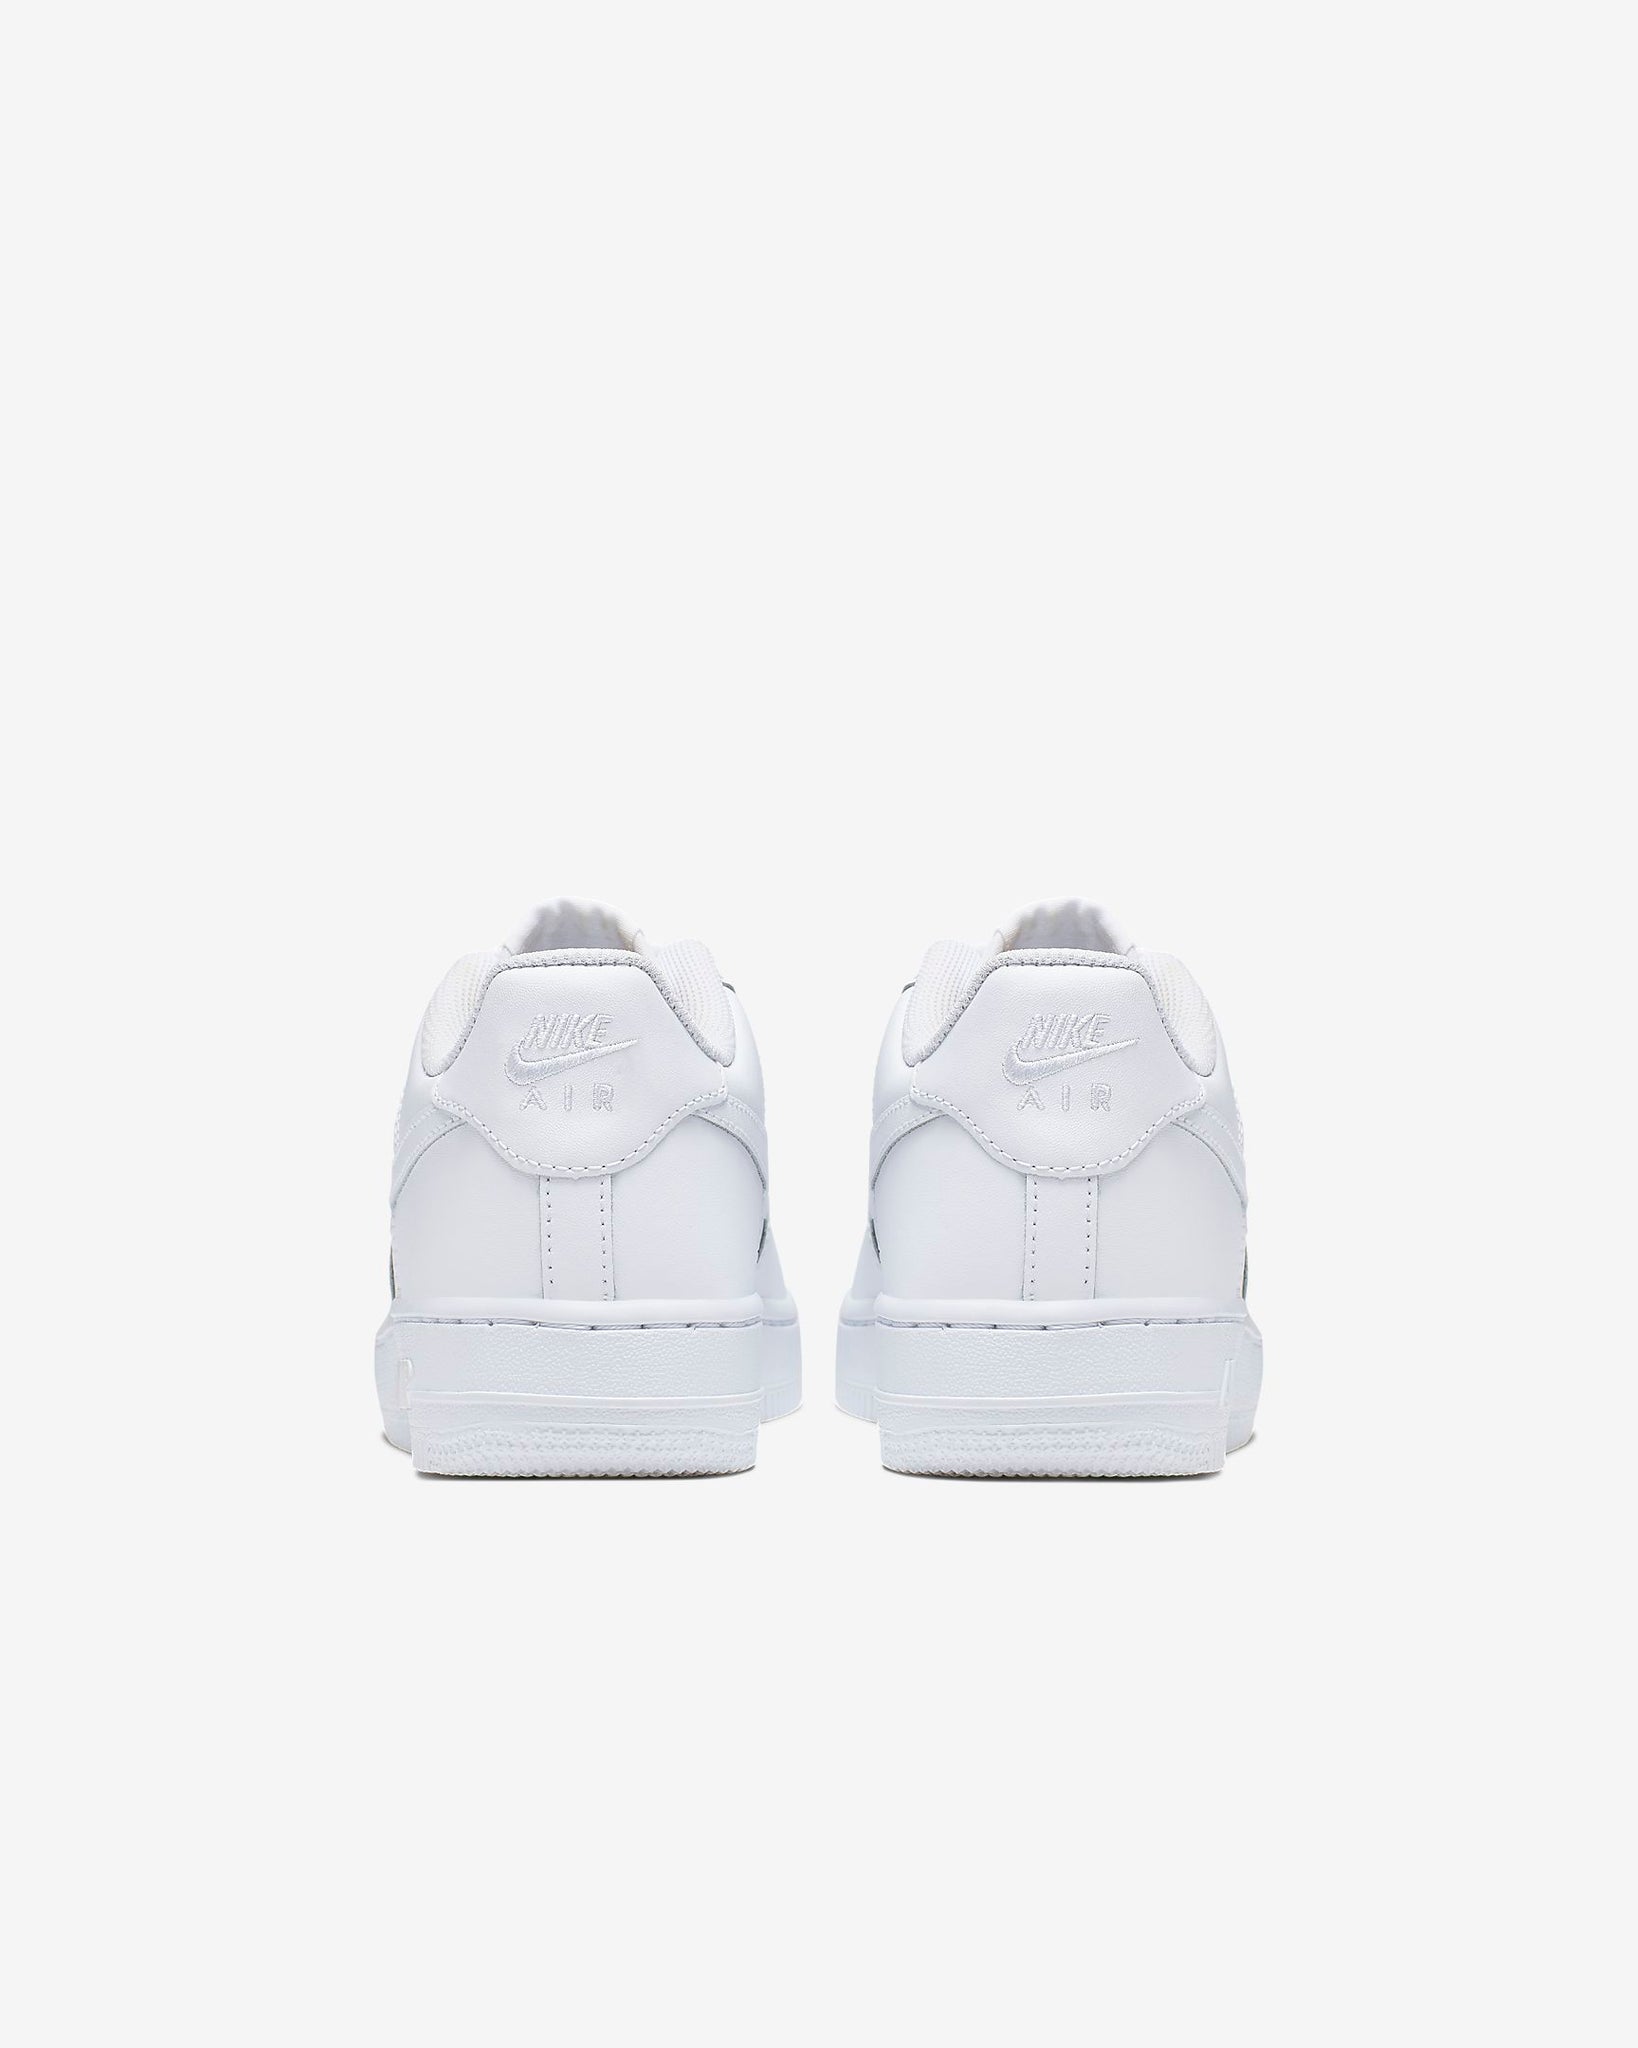 Double Boxed  119.99 Nike Air Force 1 Low Triple White Double Boxed